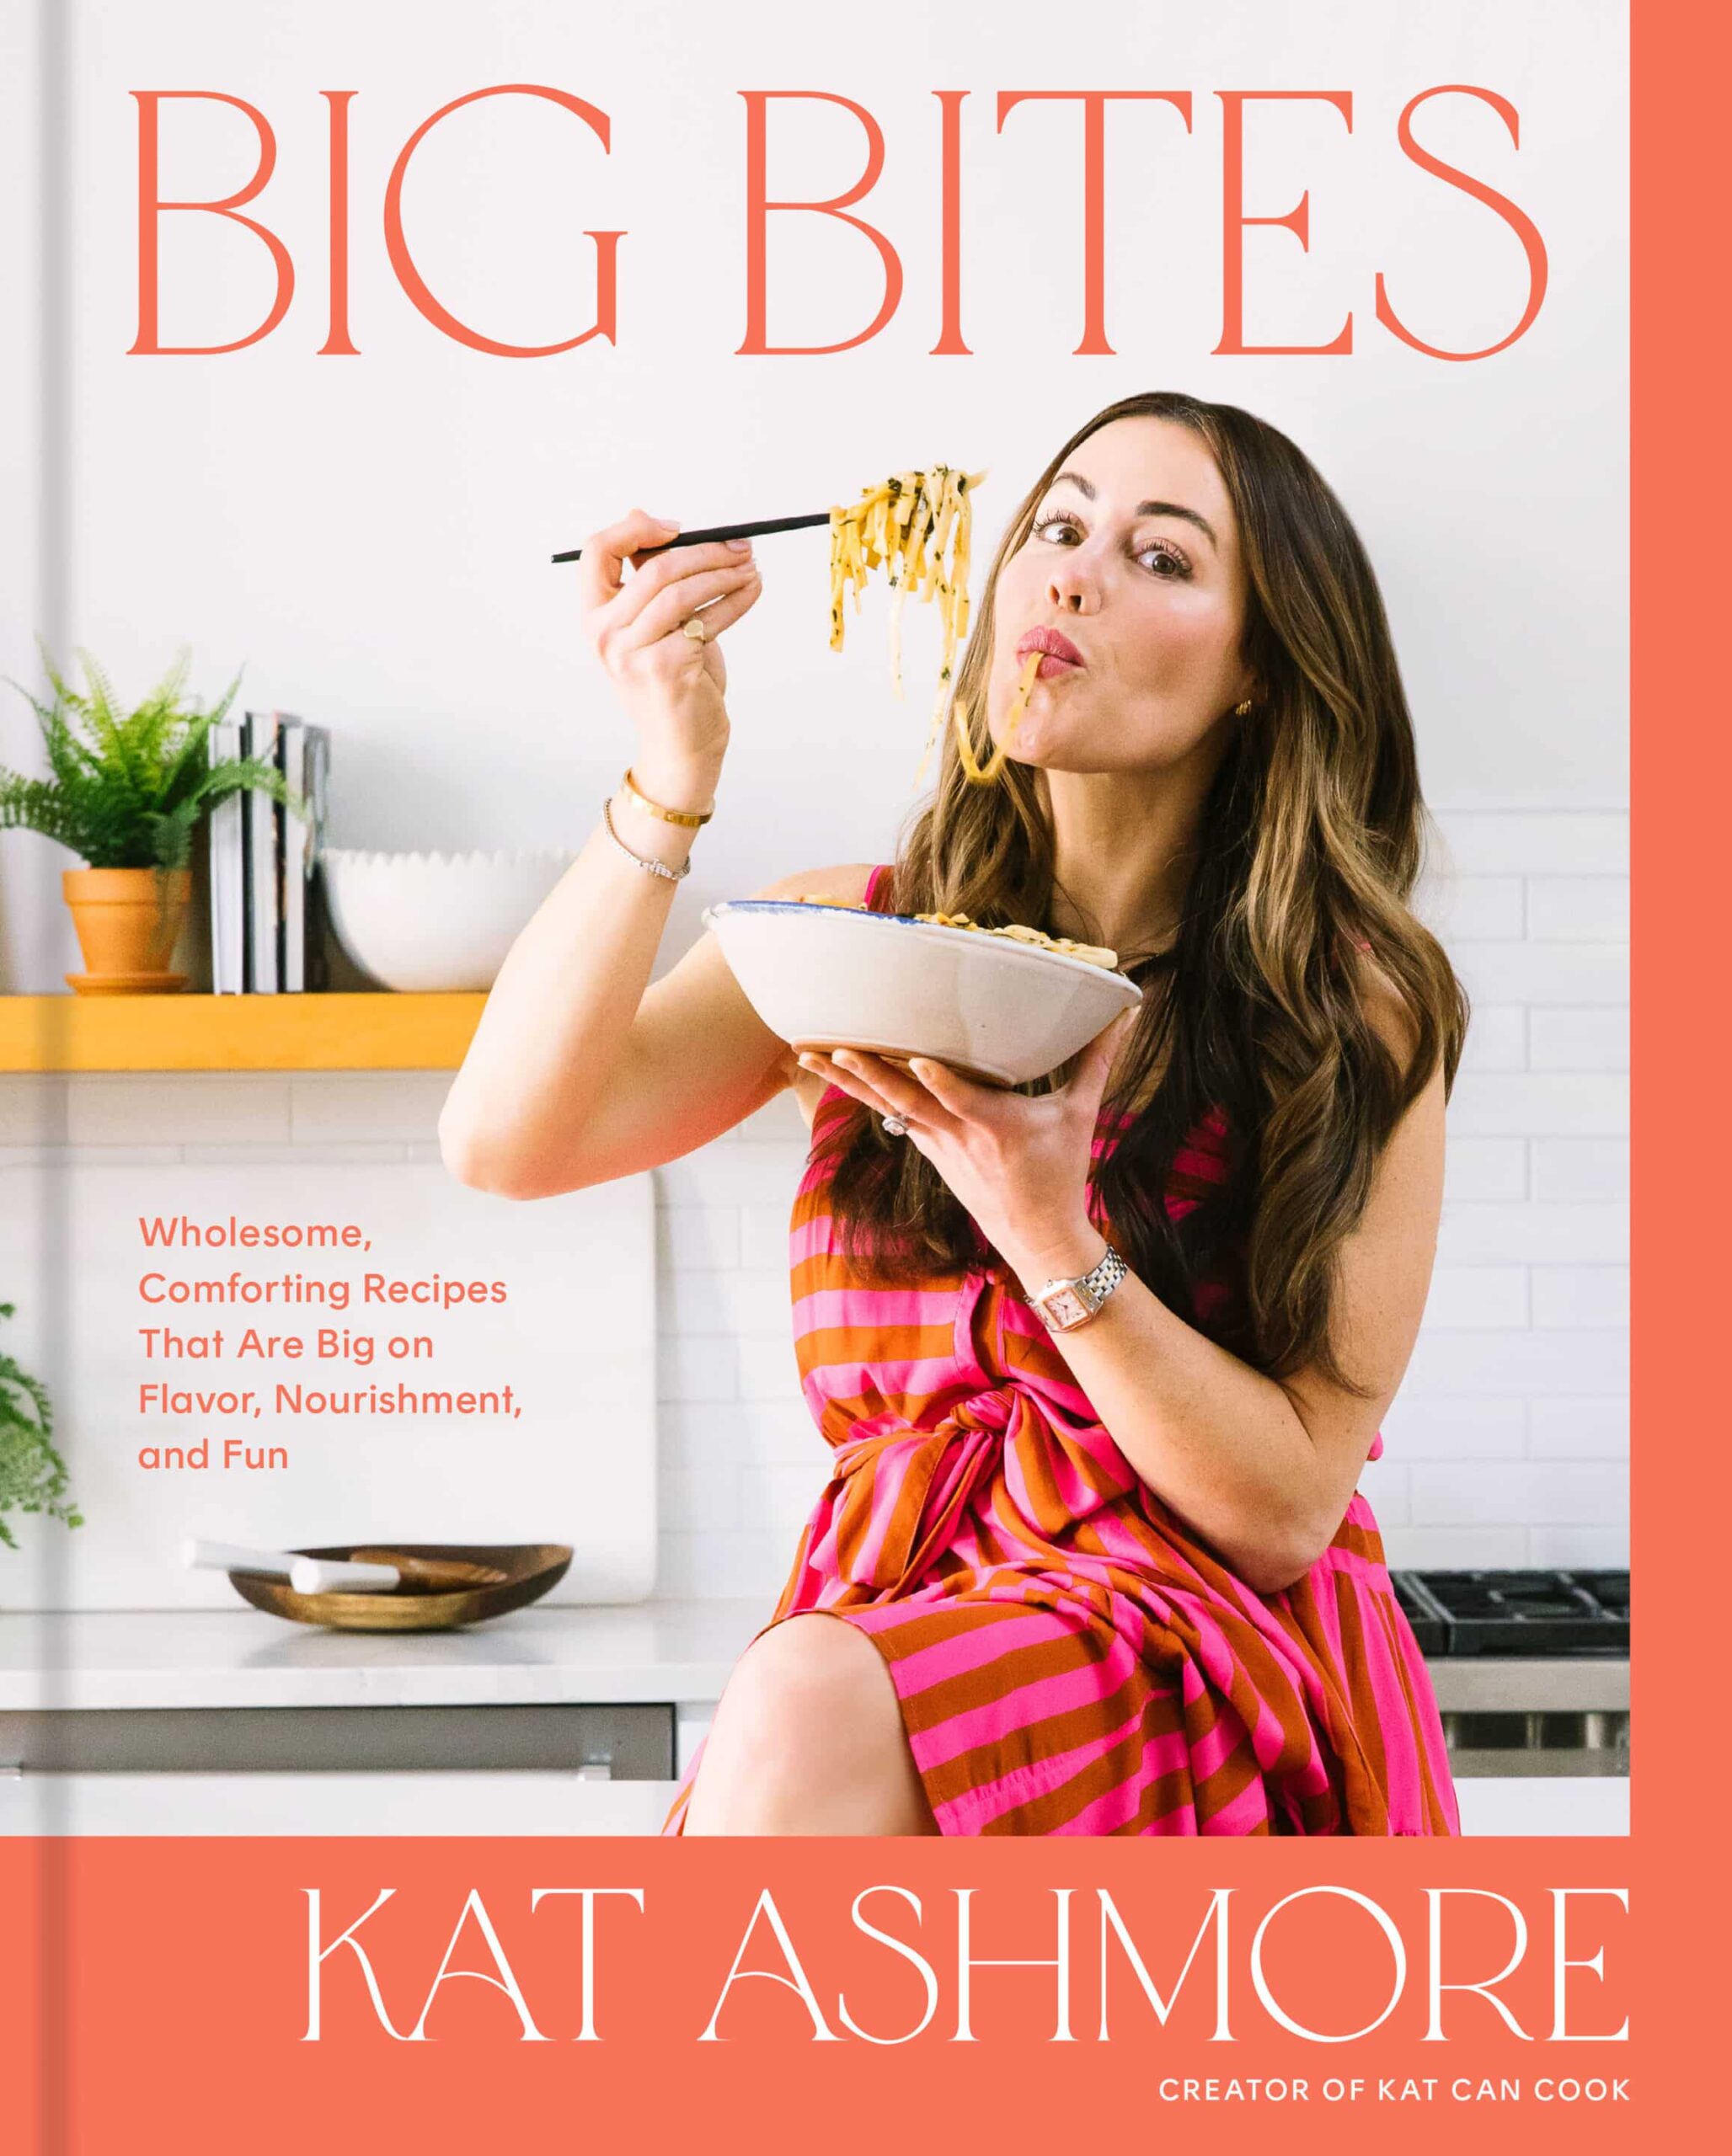  Big Bites: Wholesome, Comforting Recipes That Are Big on Flavor, Nourishment, and Fun: A Cookbook. 